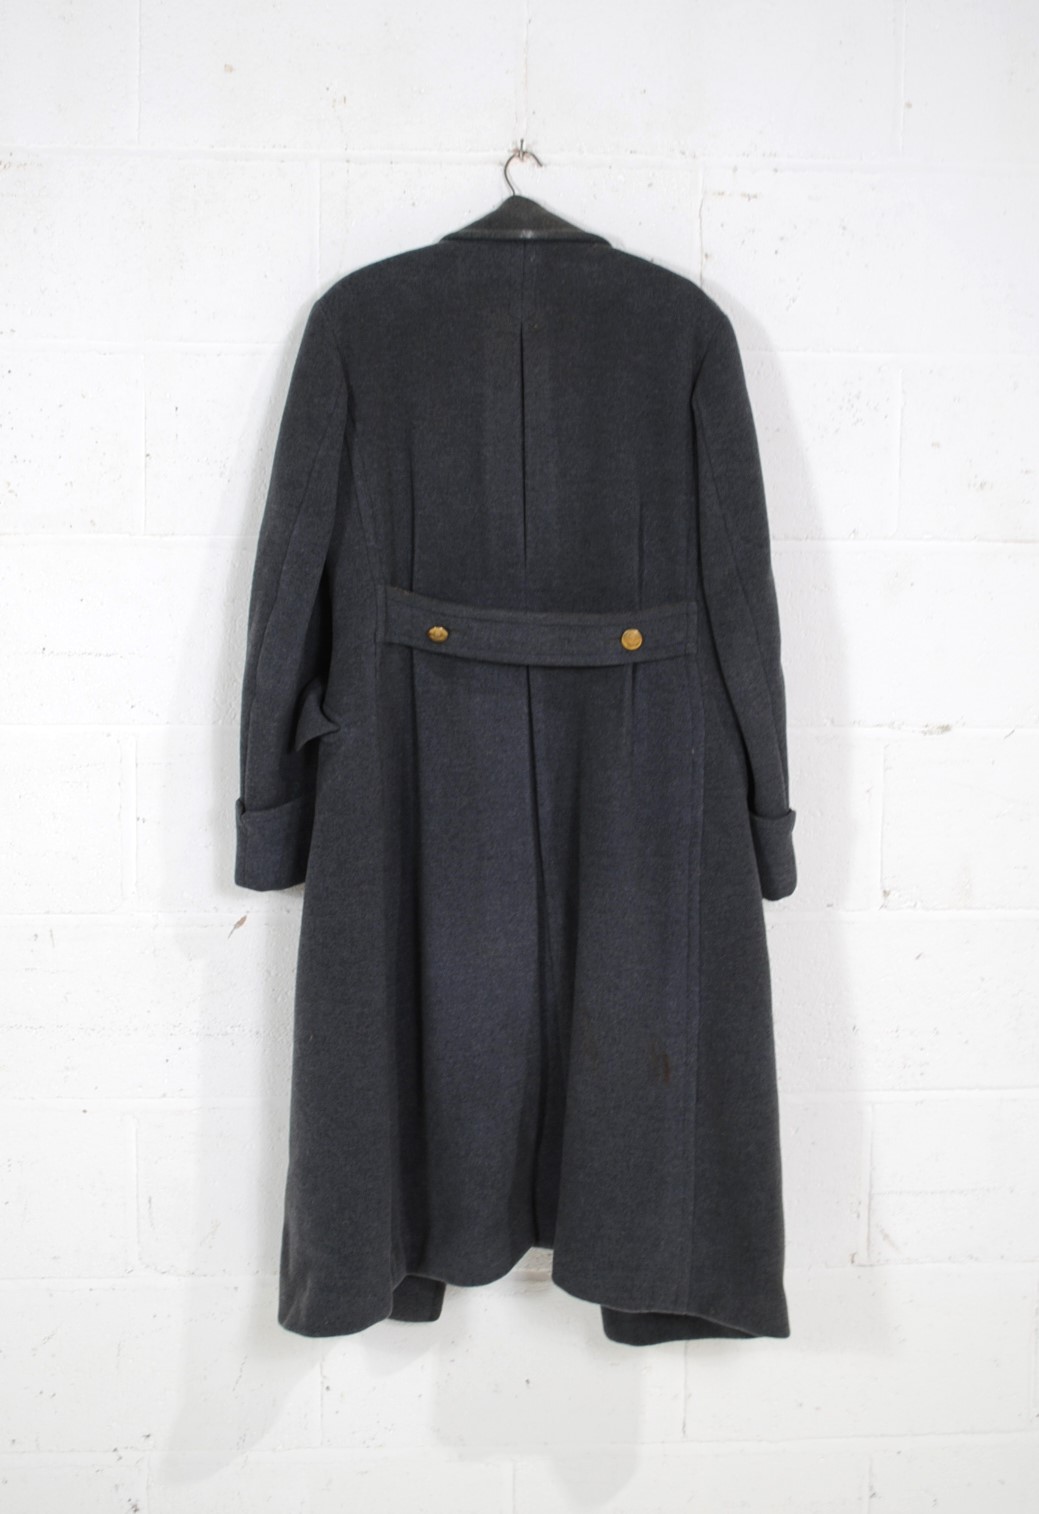 A 'Burberrys' RAF great coat - Image 6 of 6